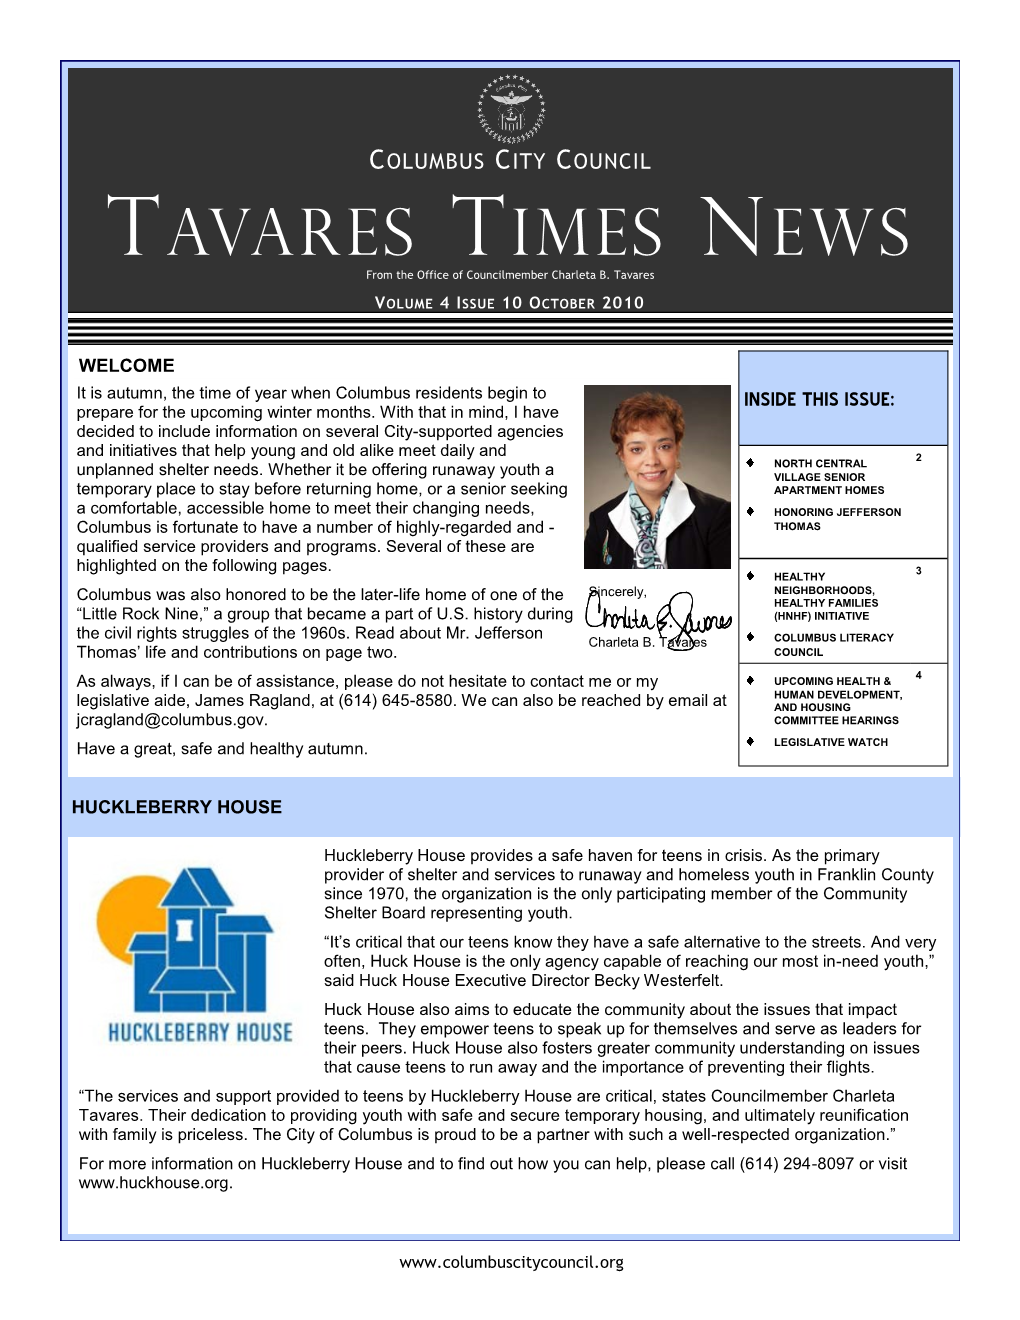 TAVARES TIMES NEWS from the Office of Councilmember Charleta B